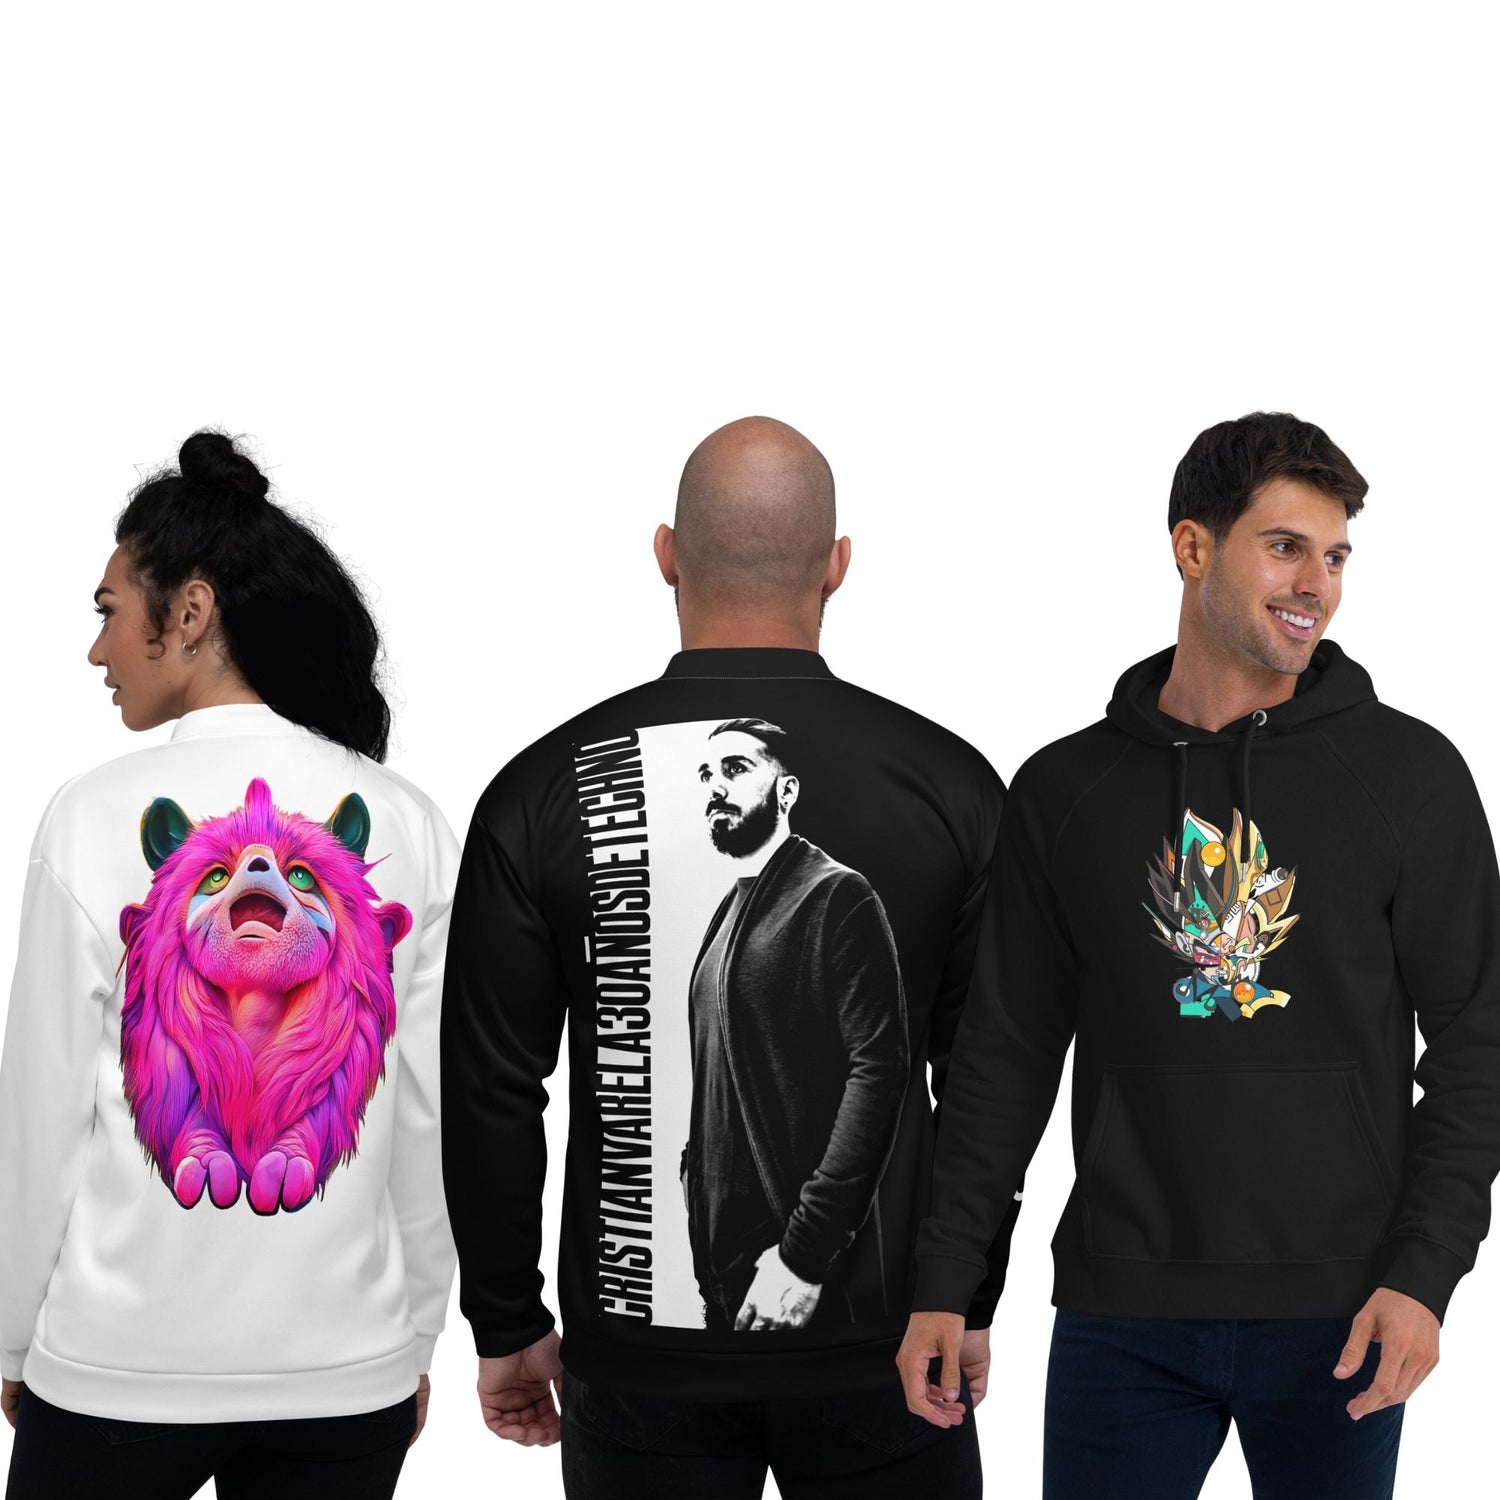 Excellent Hoodies and Full Printed Designs